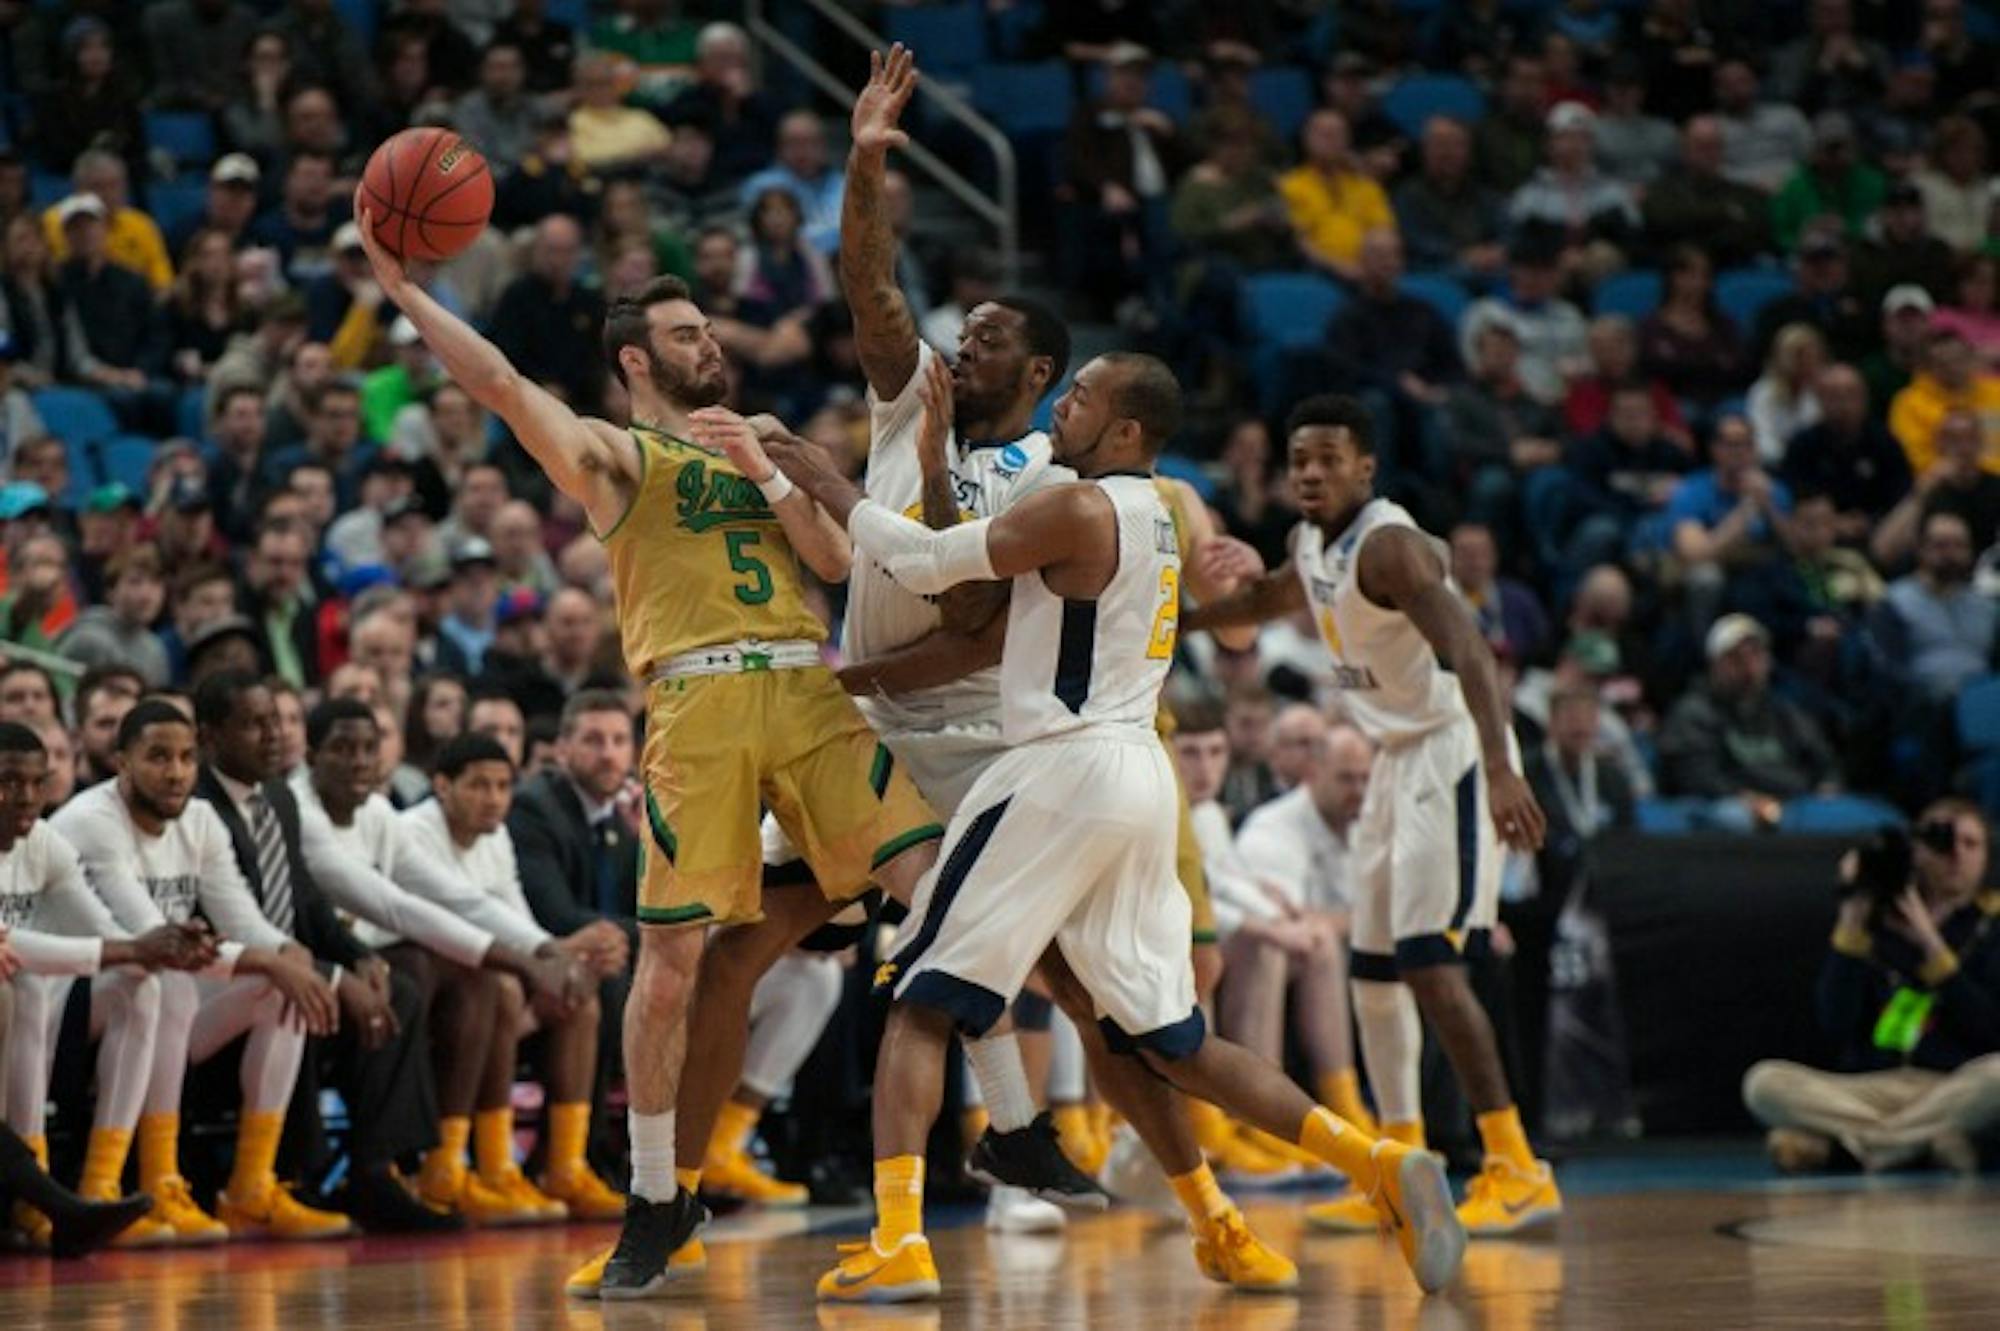 Irish junior guard Matt Farrell fends off two defenders during Notre Dame's 83-71 loss to West Virginia on Saturday at KeyBank Arena.